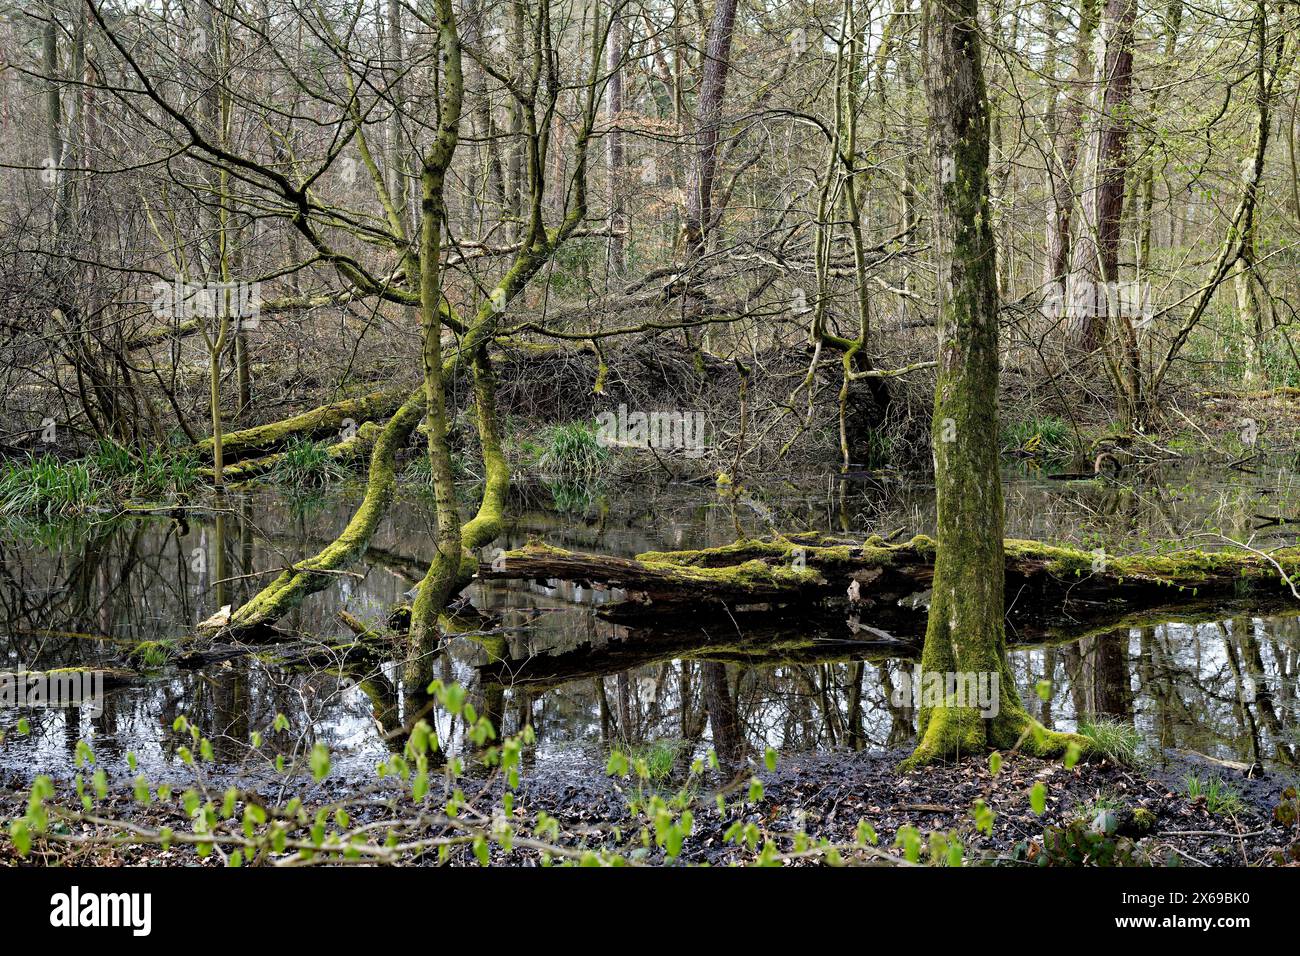 Europe, Germany, North Rhine-Westphalia, Bonn, city, Bonn, Ippendorf, Kottenforst, Waldau, forest, nature reserve, forest reserve, swampy terrain, water, beech, pine, tree, tree stump, moss-covered trunk lying in water, dead, deadwood, weathered, atmosphere, mystical, beginning green, slightly cloudy, daylight, Stock Photo